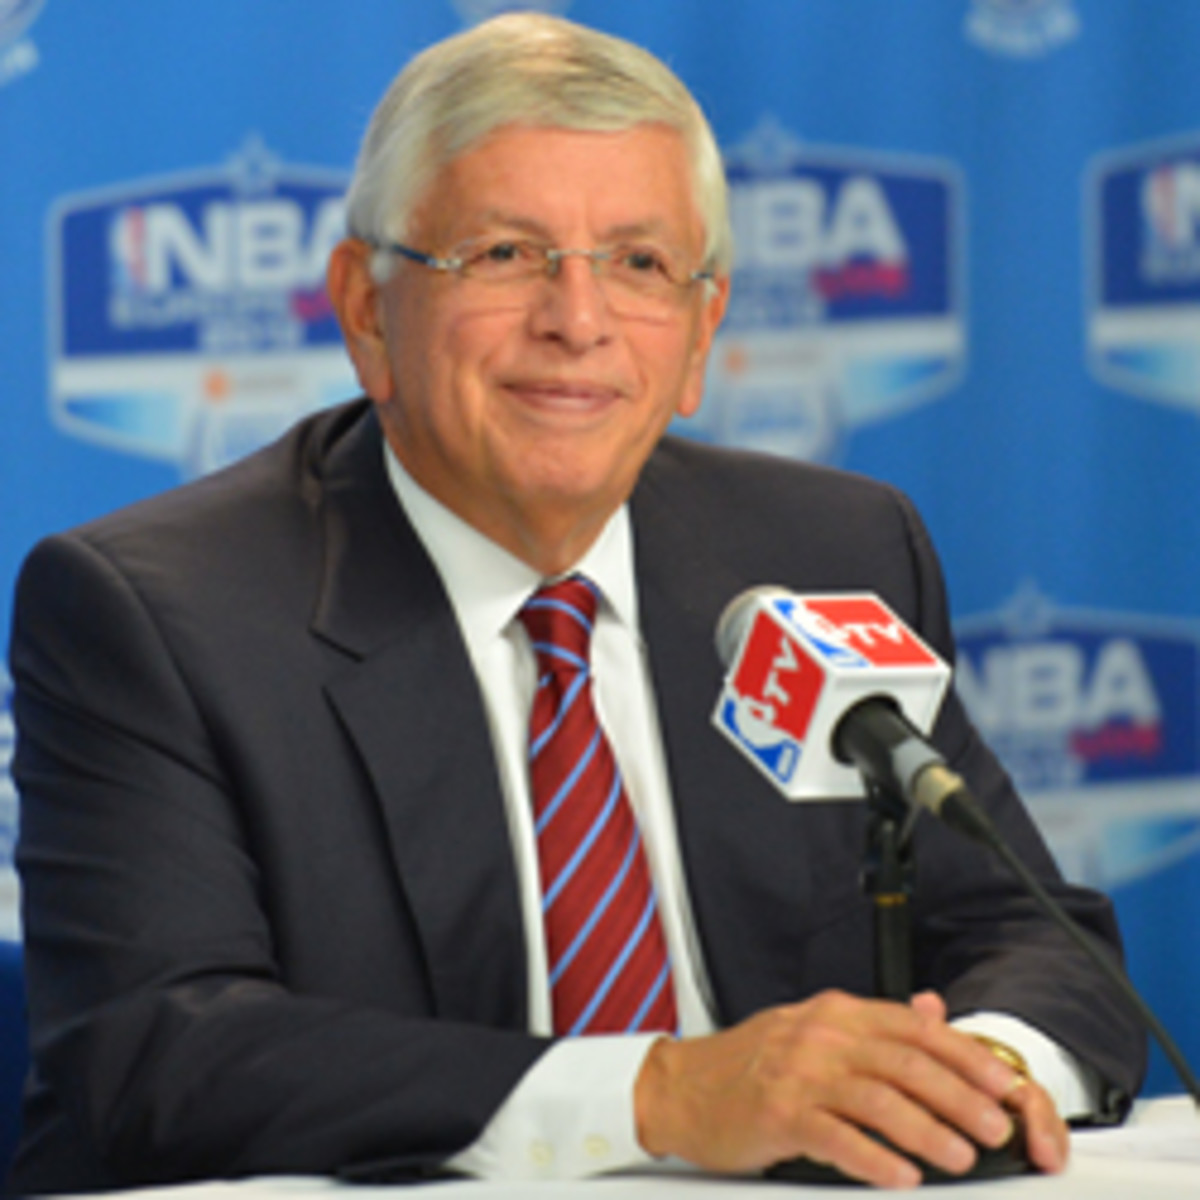 NBA Commissioner David Stern has long desired adding a division of teams in European cities. (Jesse D. Garrabrant/NBAE via Getty Images)